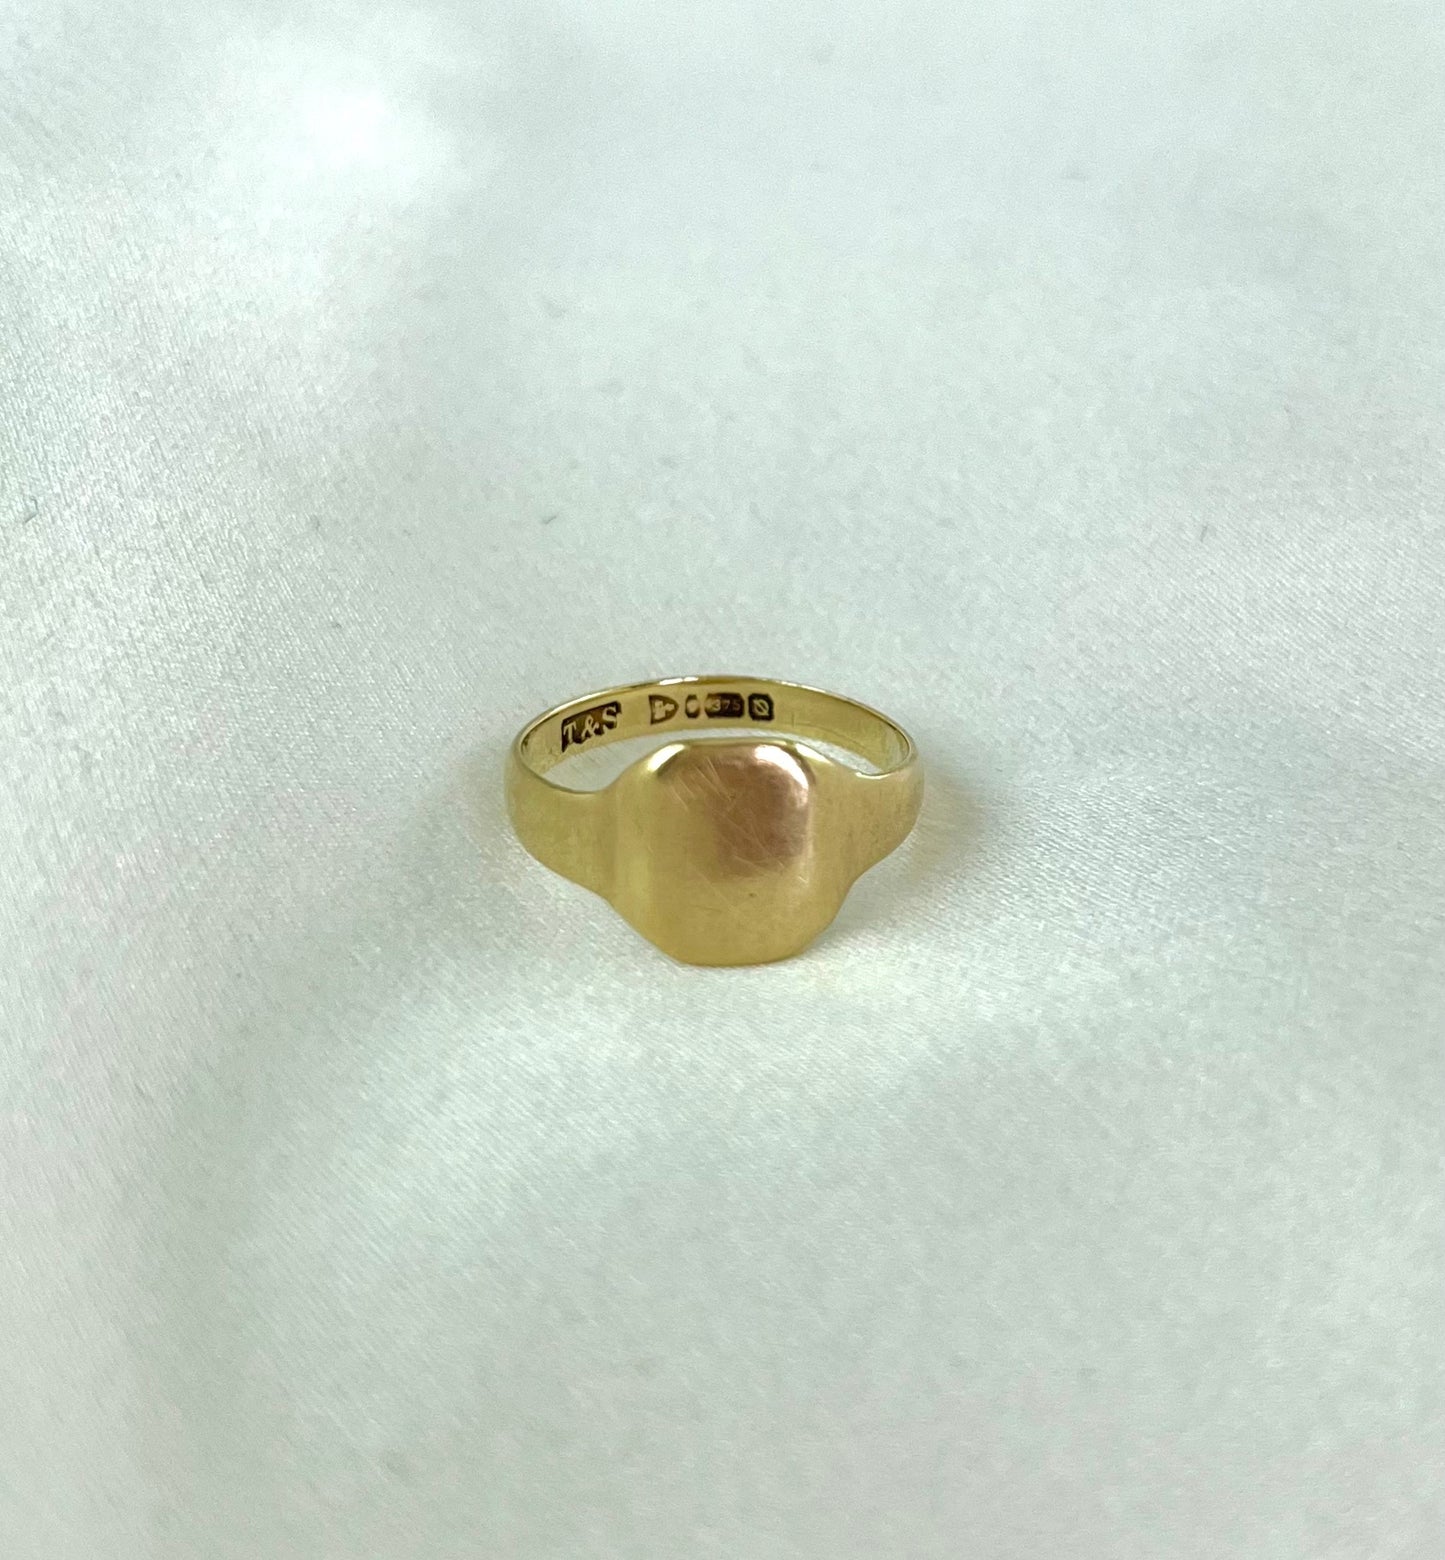 Vintage 1930s Solid 9ct Yellow Gold Signet Ring 1930s, Size L + 0.5